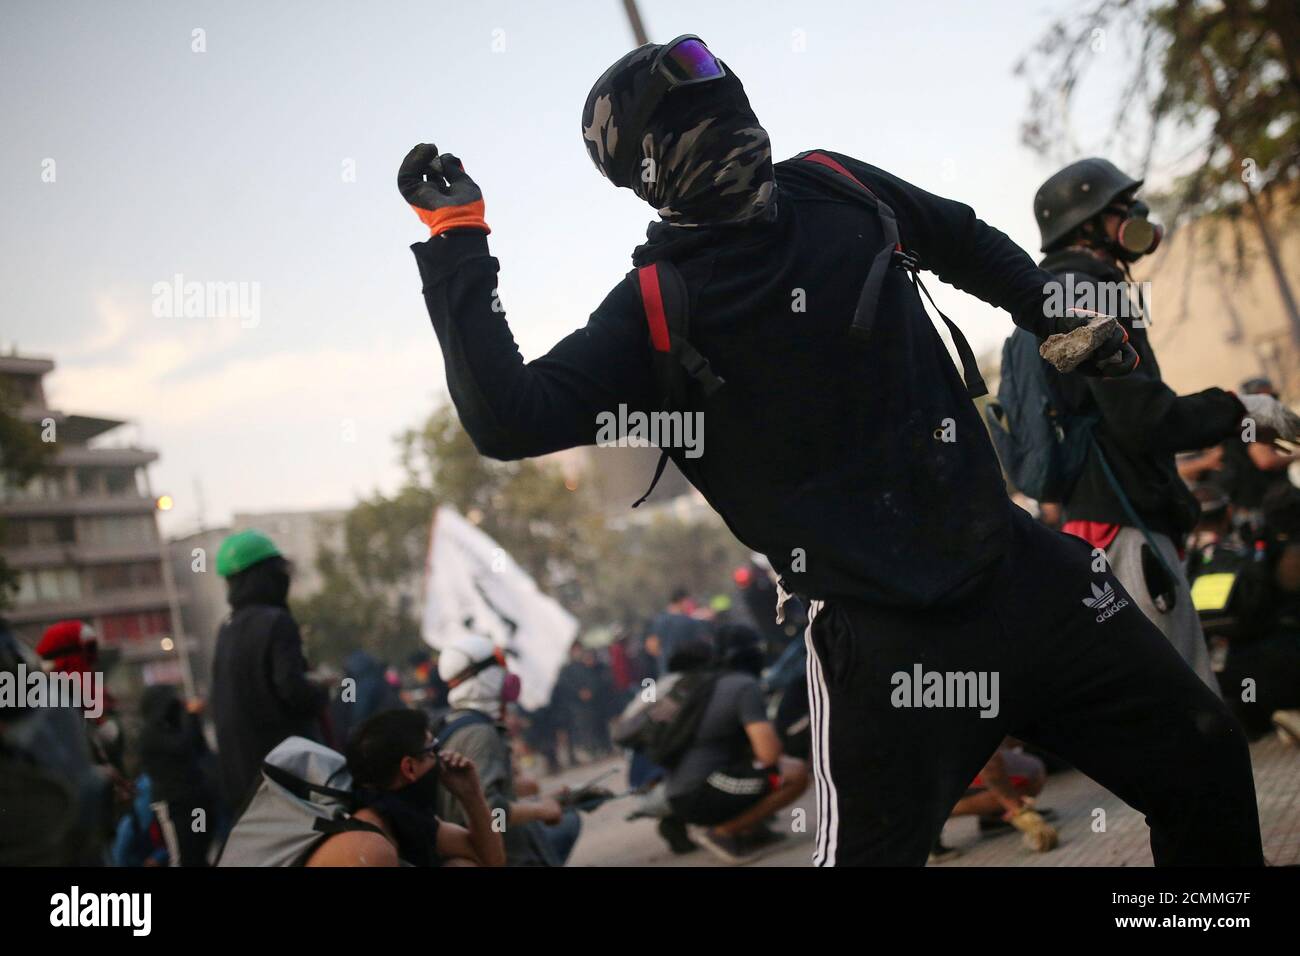 A demonstrator throws stones as he clashes with riot police during anti-government protests in Santiago, Chile January 24, 2020. REUTERS/Edgard Garrido Stock Photo